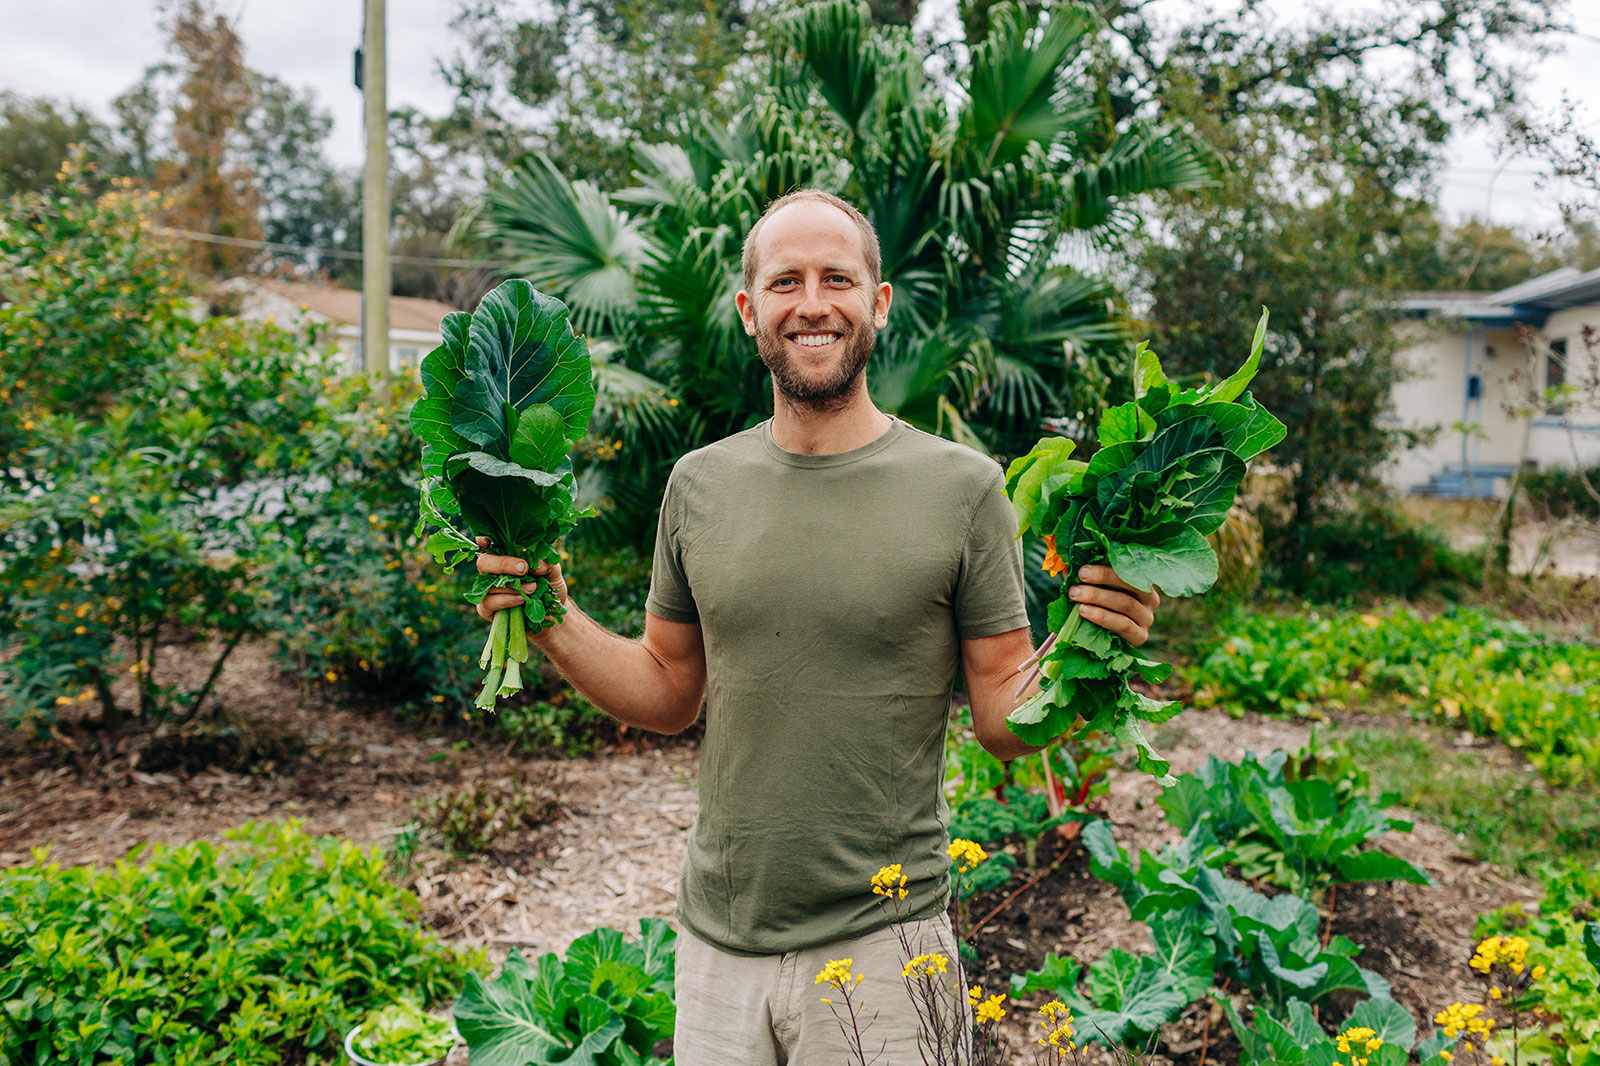 This Guy Is Growing All of His Food…on Other People’s Land